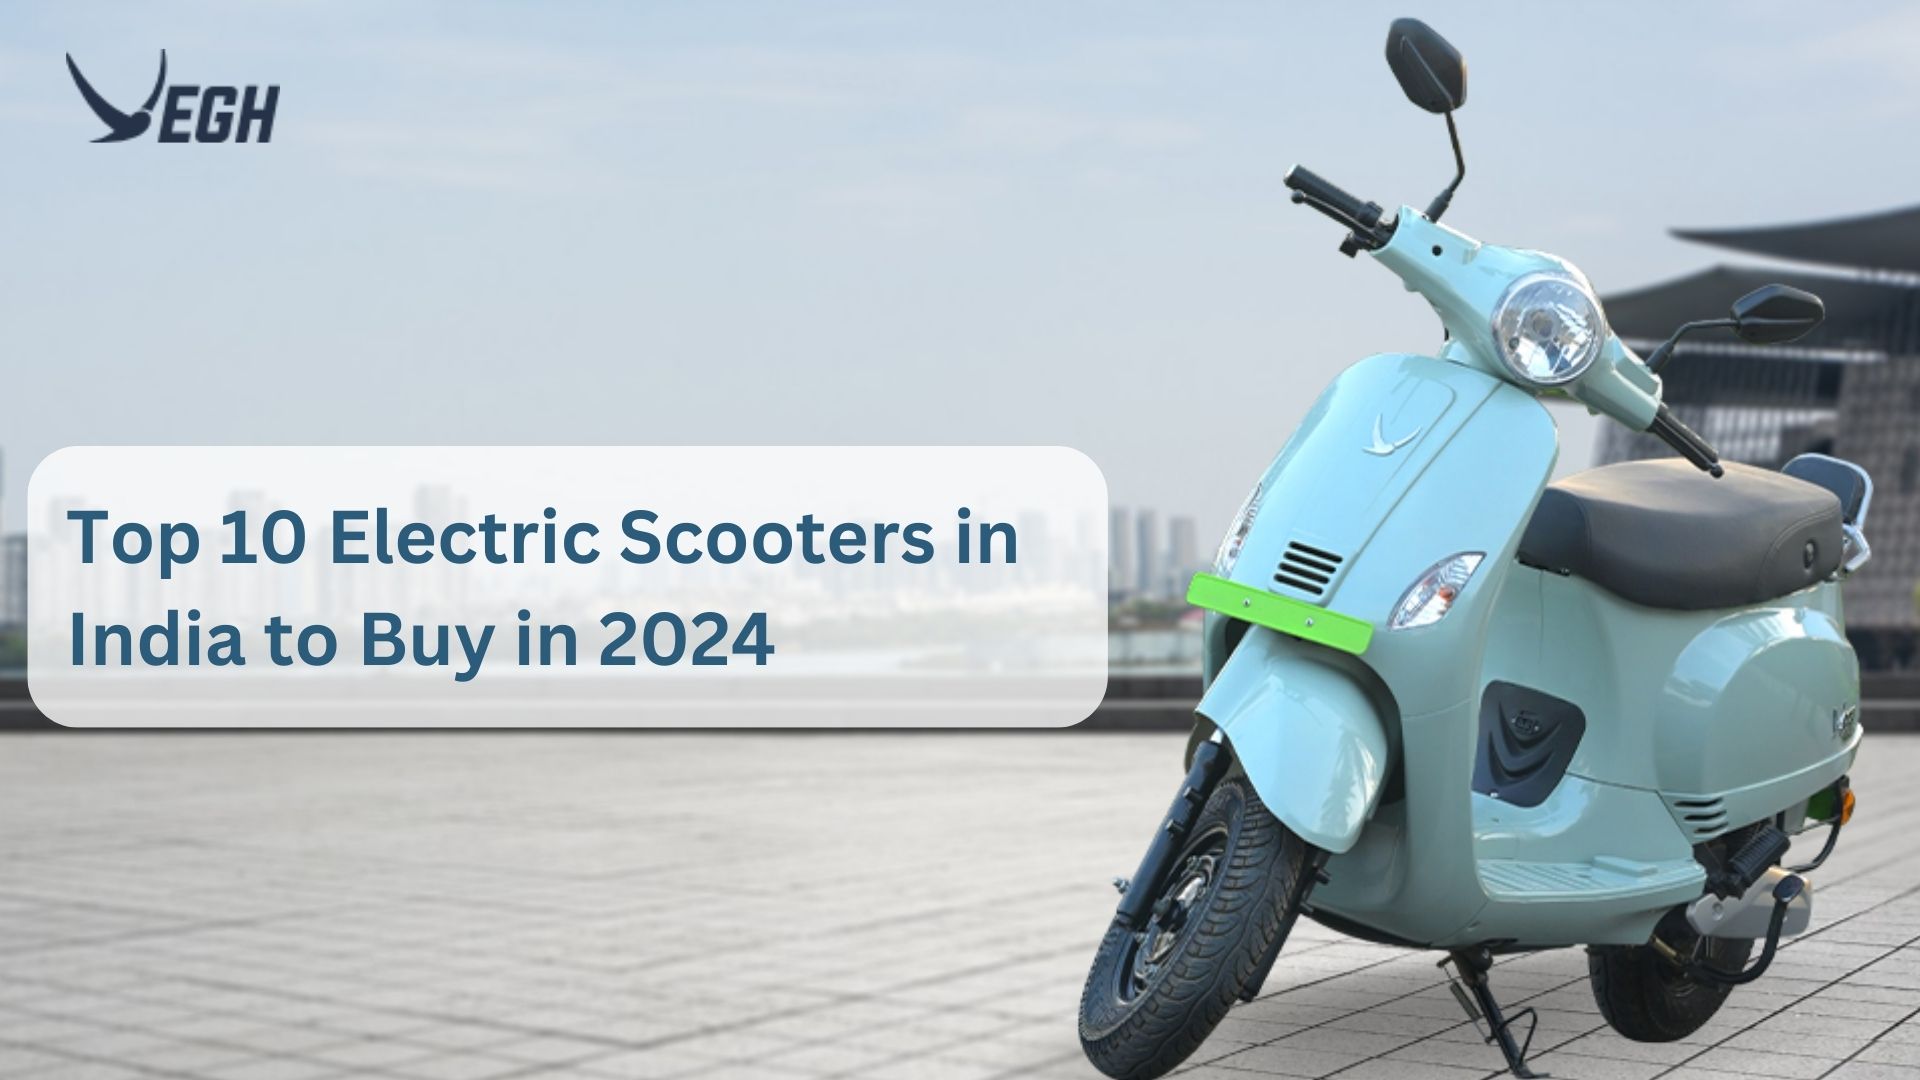 Top 10 Electric Scooters in India to Buy in 2024